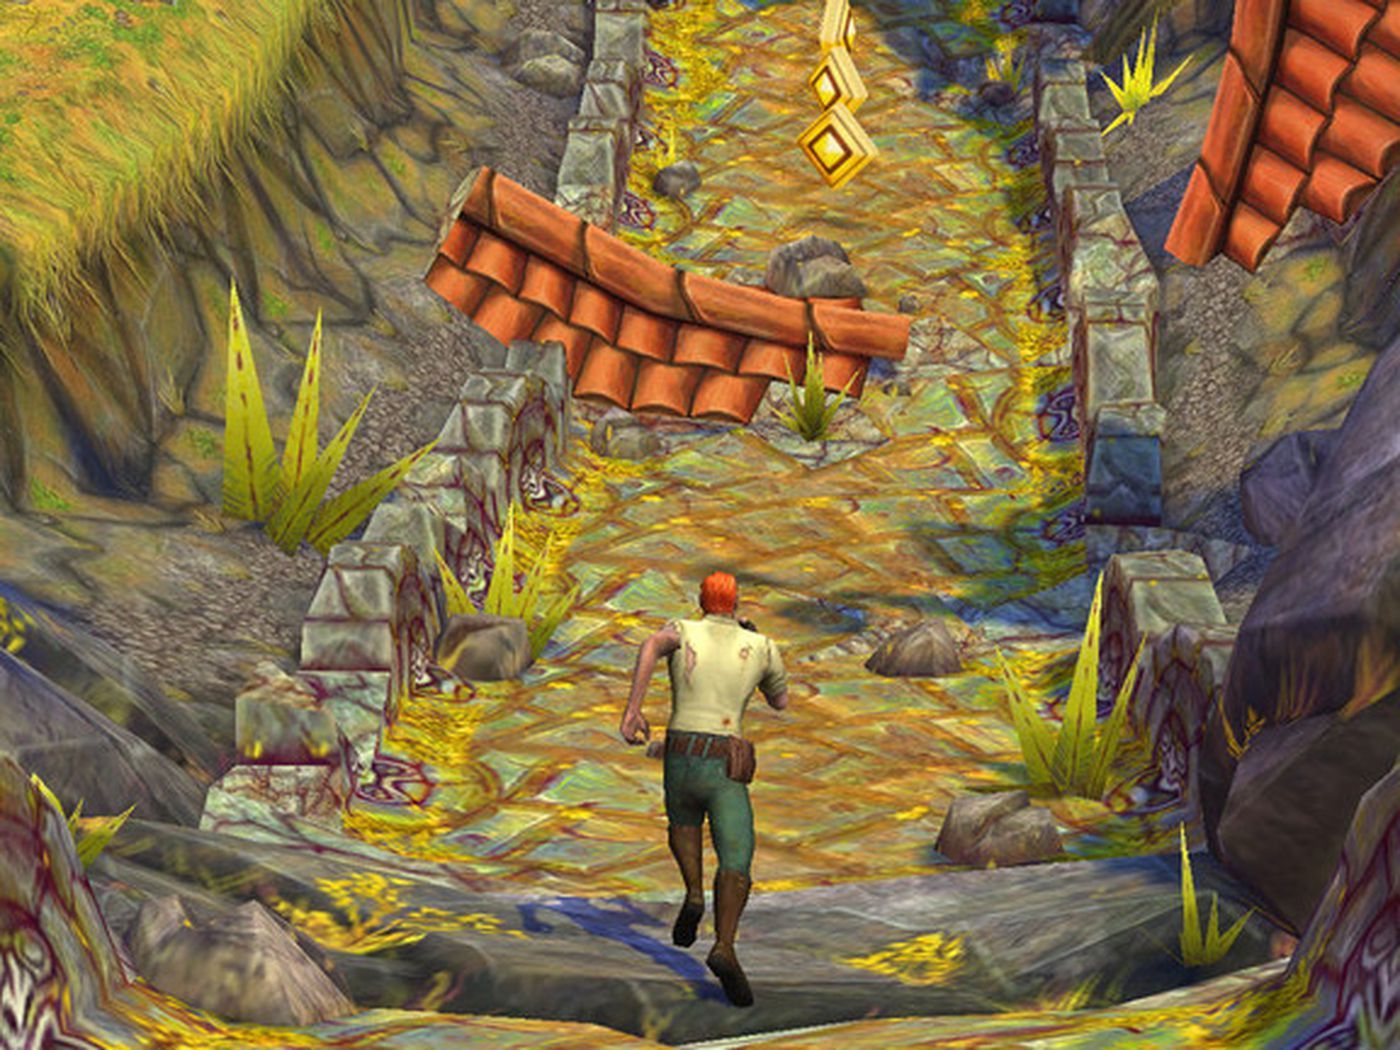 Temple Run 2 reaches 20 million downloads in four days